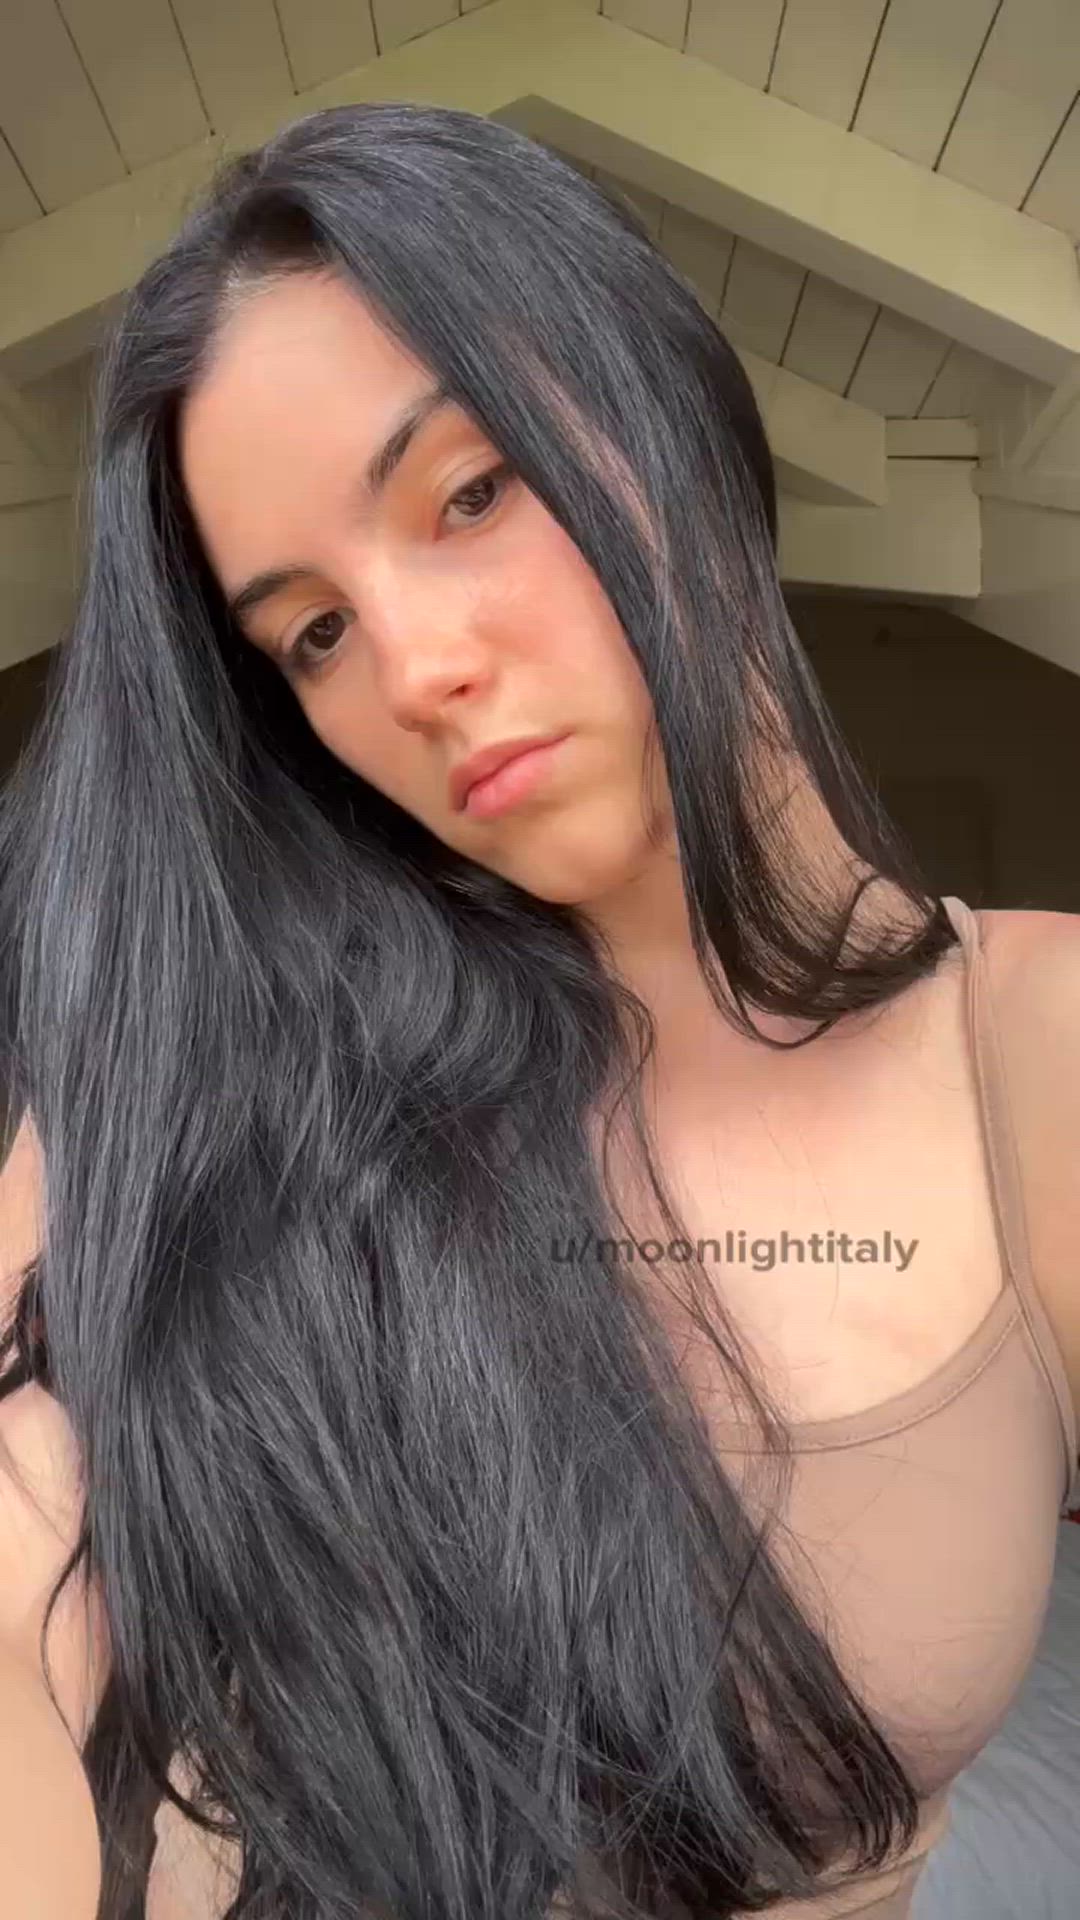 Amateur porn video with onlyfans model moonlightitalyxx <strong>@maikonudesvip</strong>